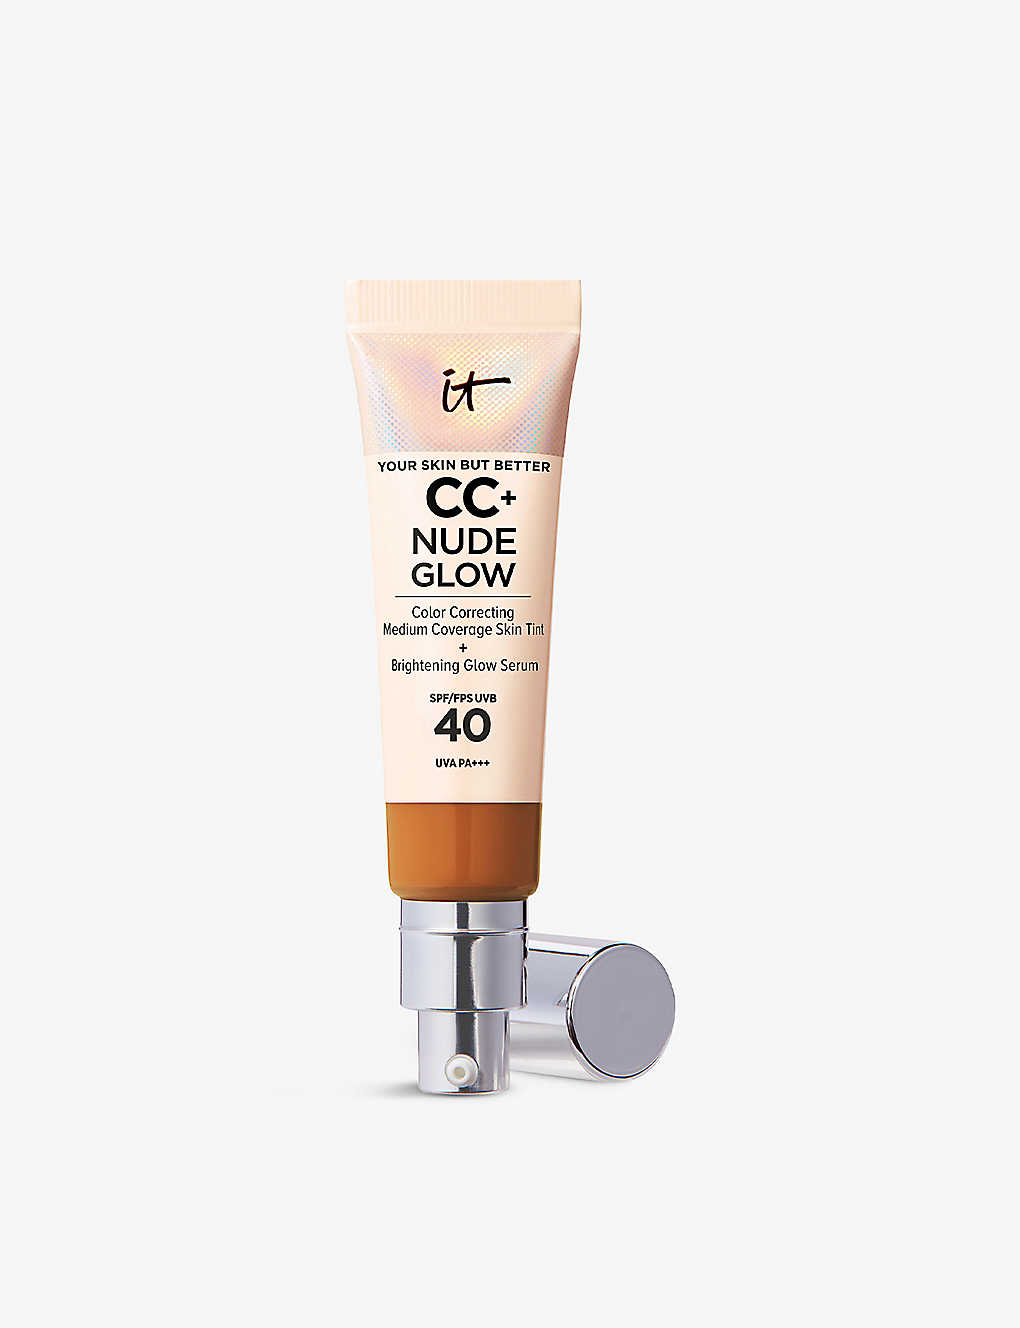 It Cosmetics Rich Your Skin But Better Cc+ Nude Glow Skin Tint Spf 40 32ml